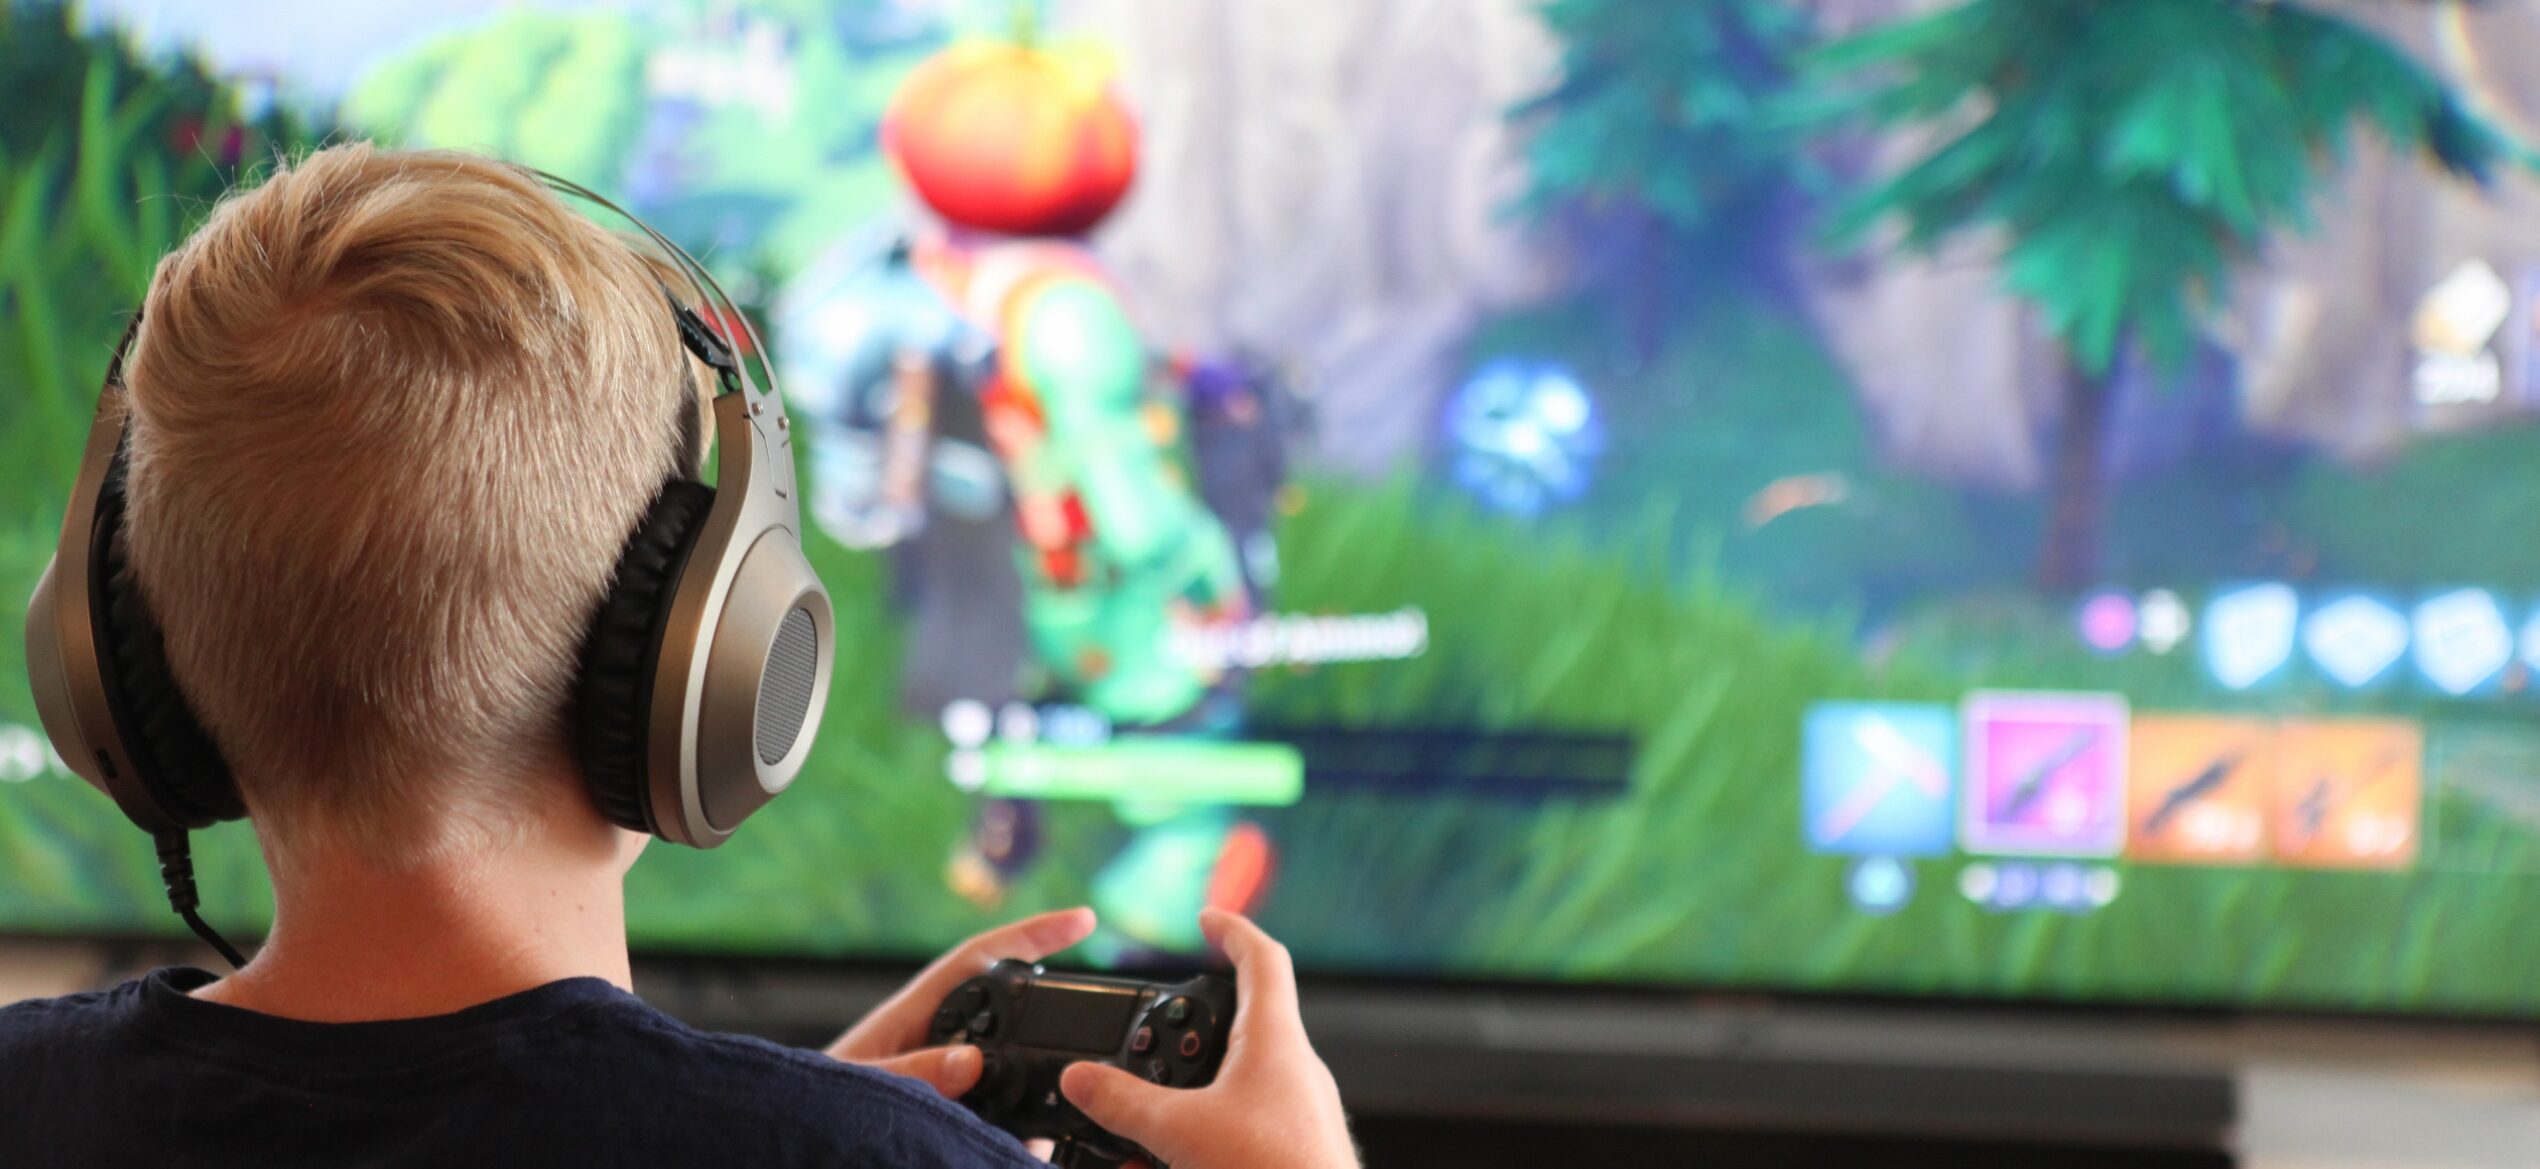 Is Fortnite the ‘Real’ Metaverse?